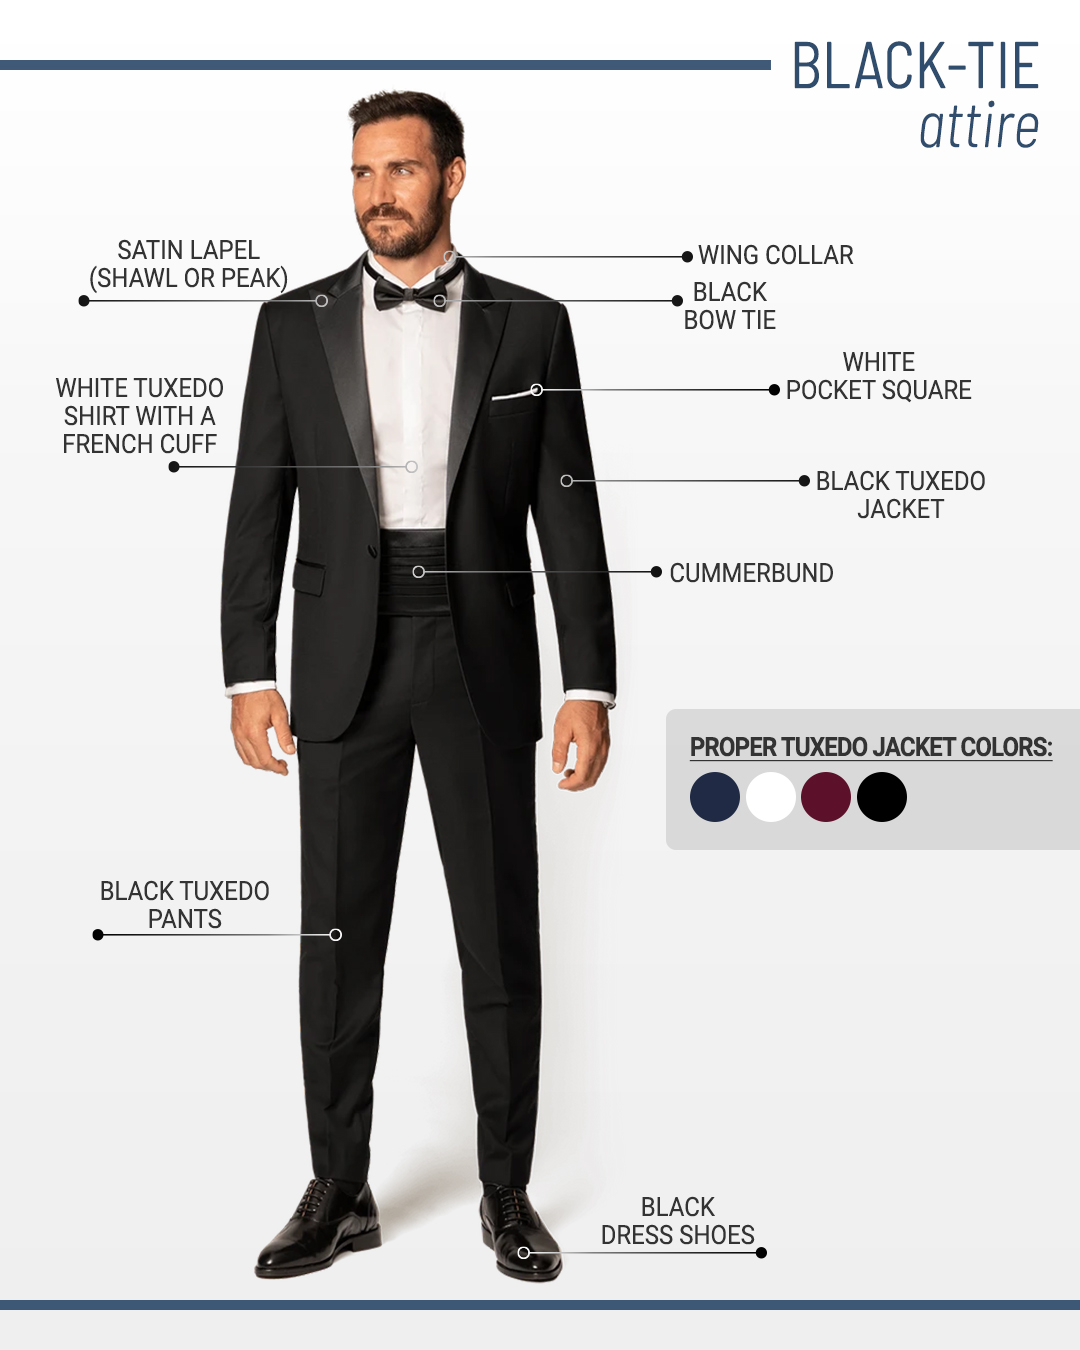 Formal dress code and attire for men